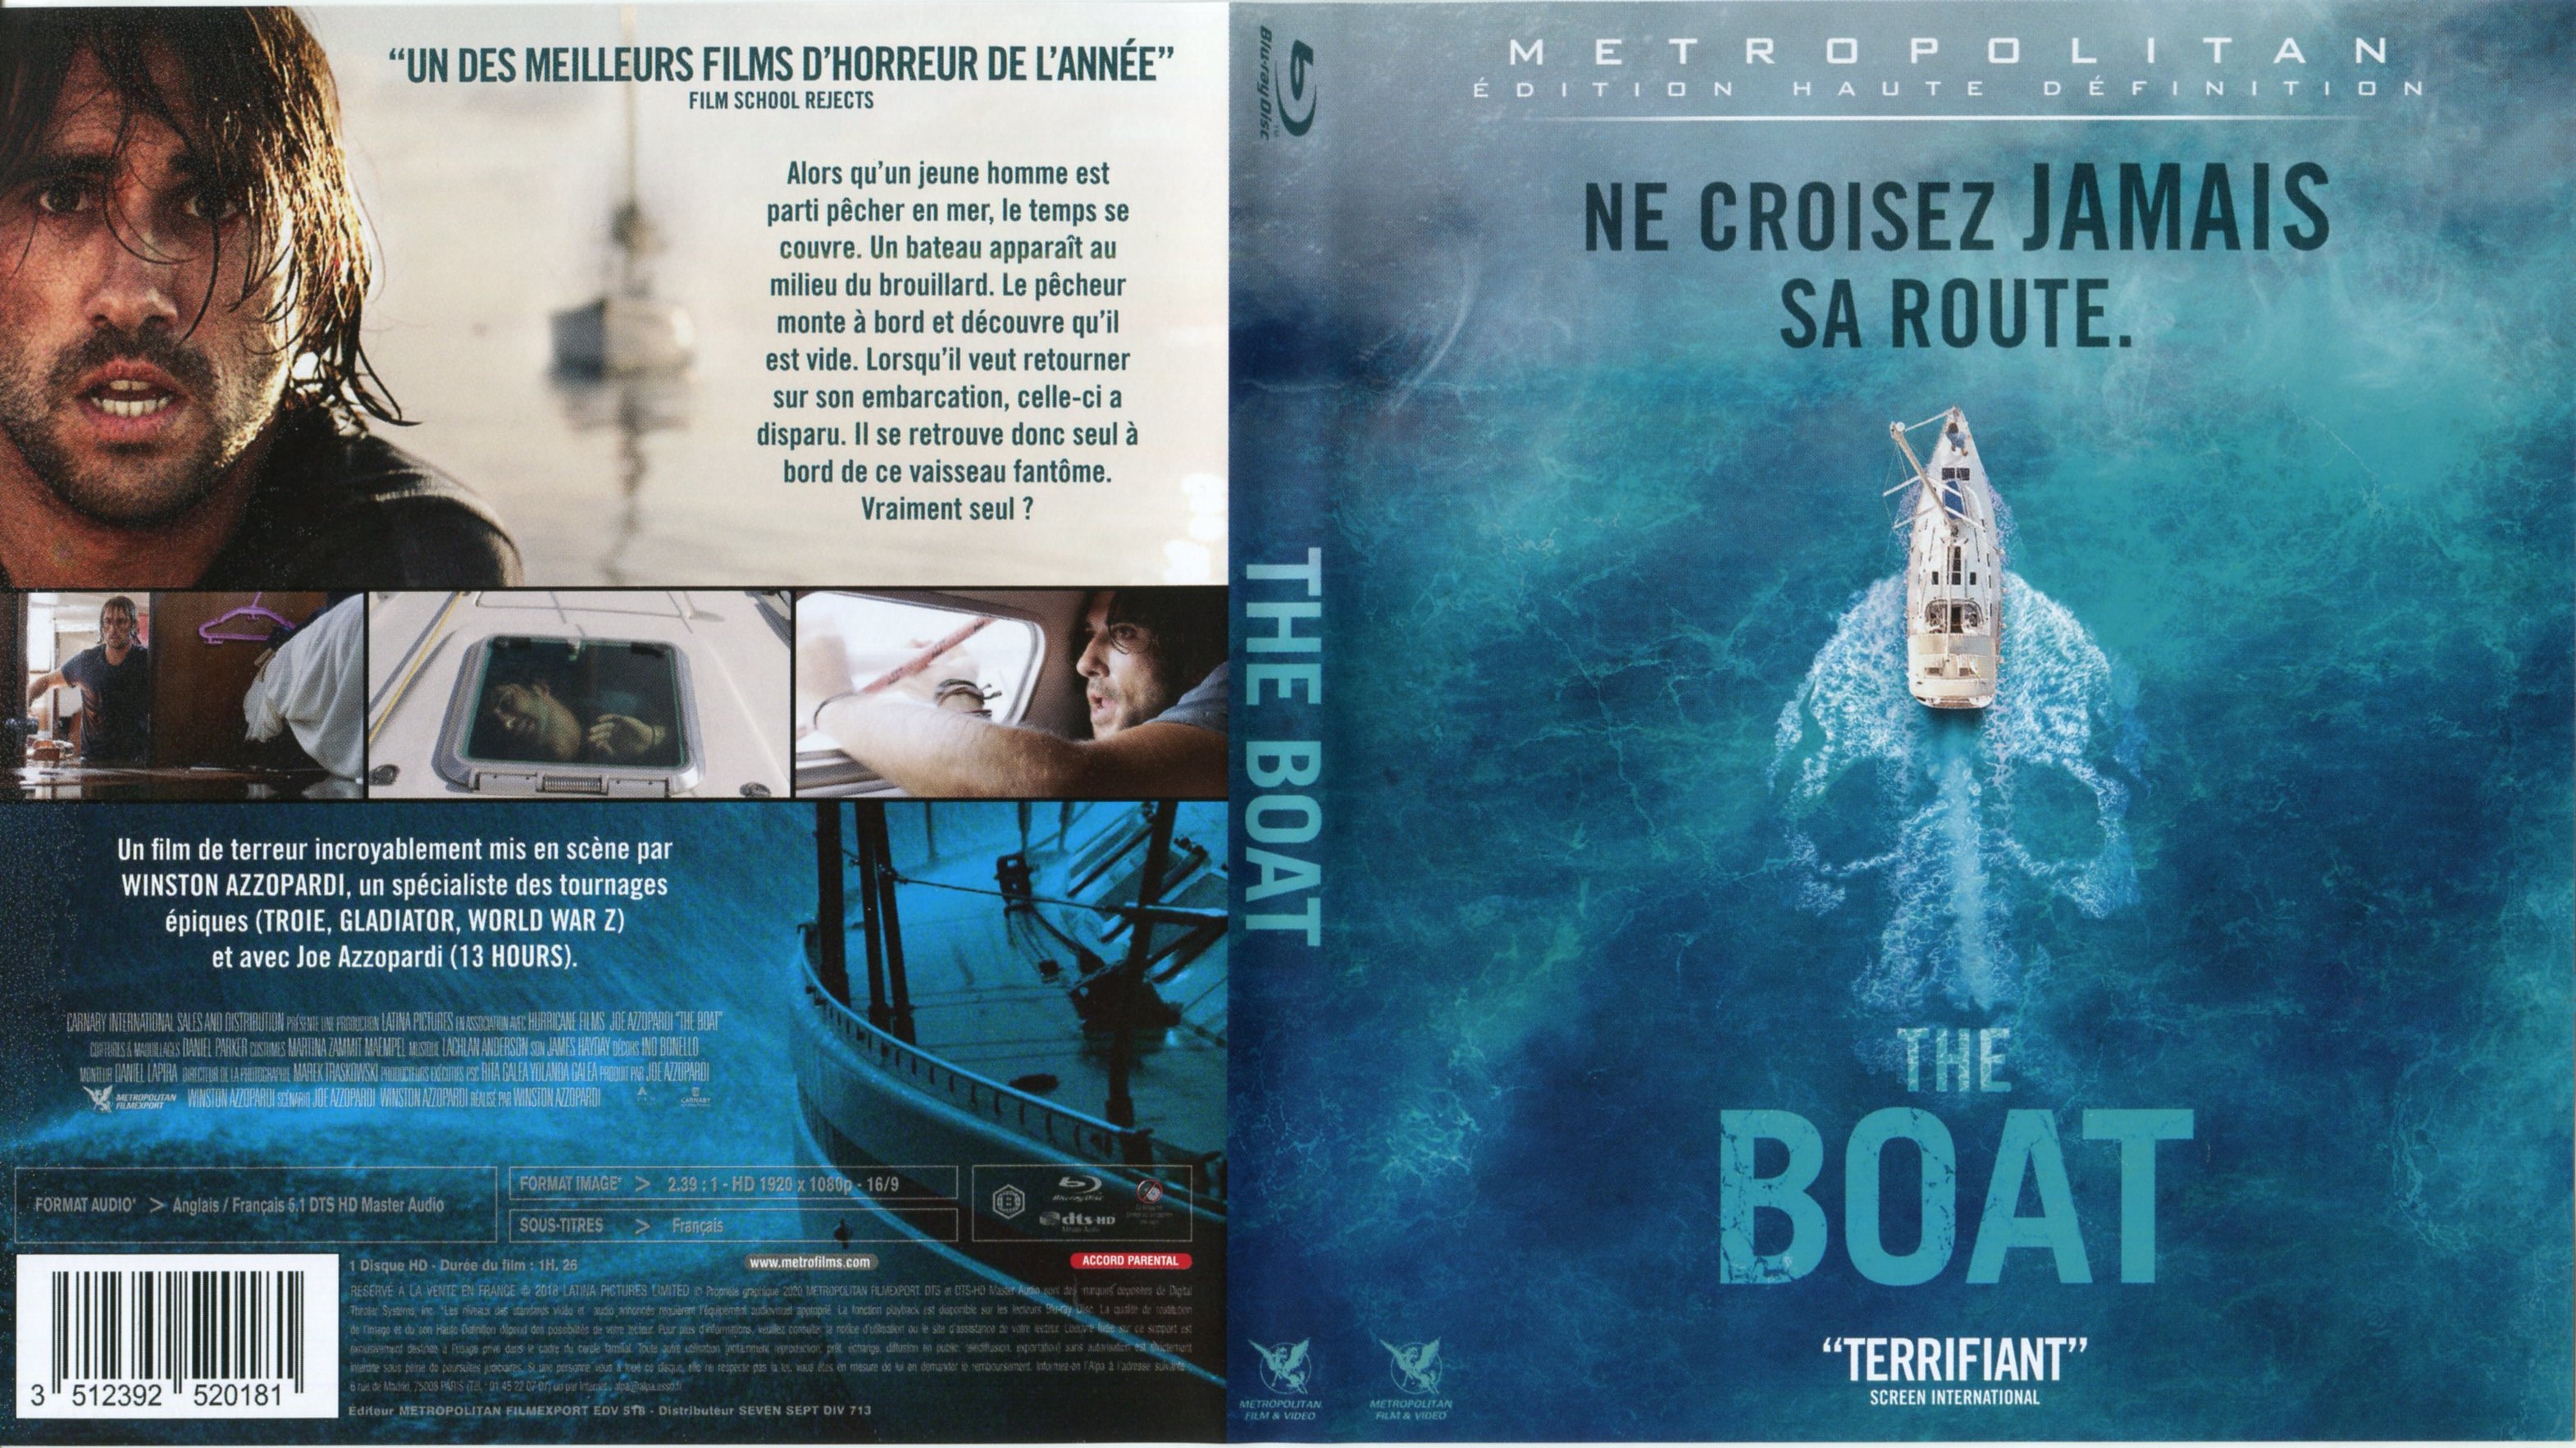 Jaquette DVD The boat (BLU-RAY)